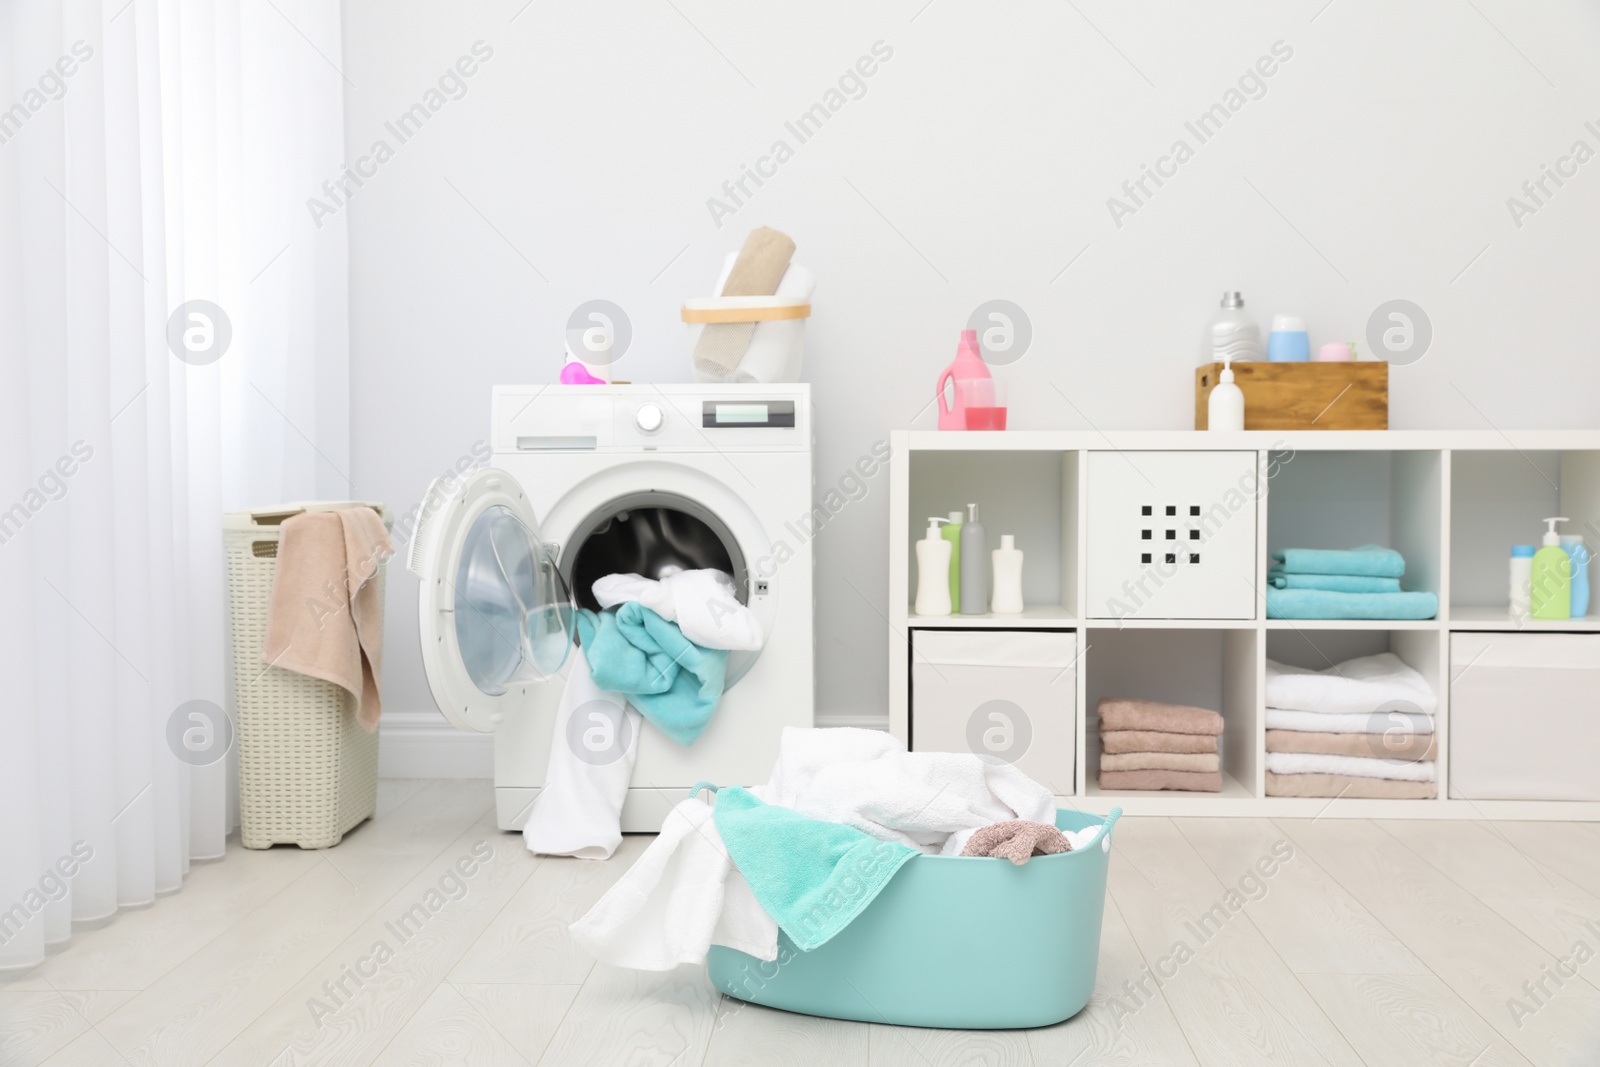 Photo of Bathroom interior with dirty towels in basket and washing machine